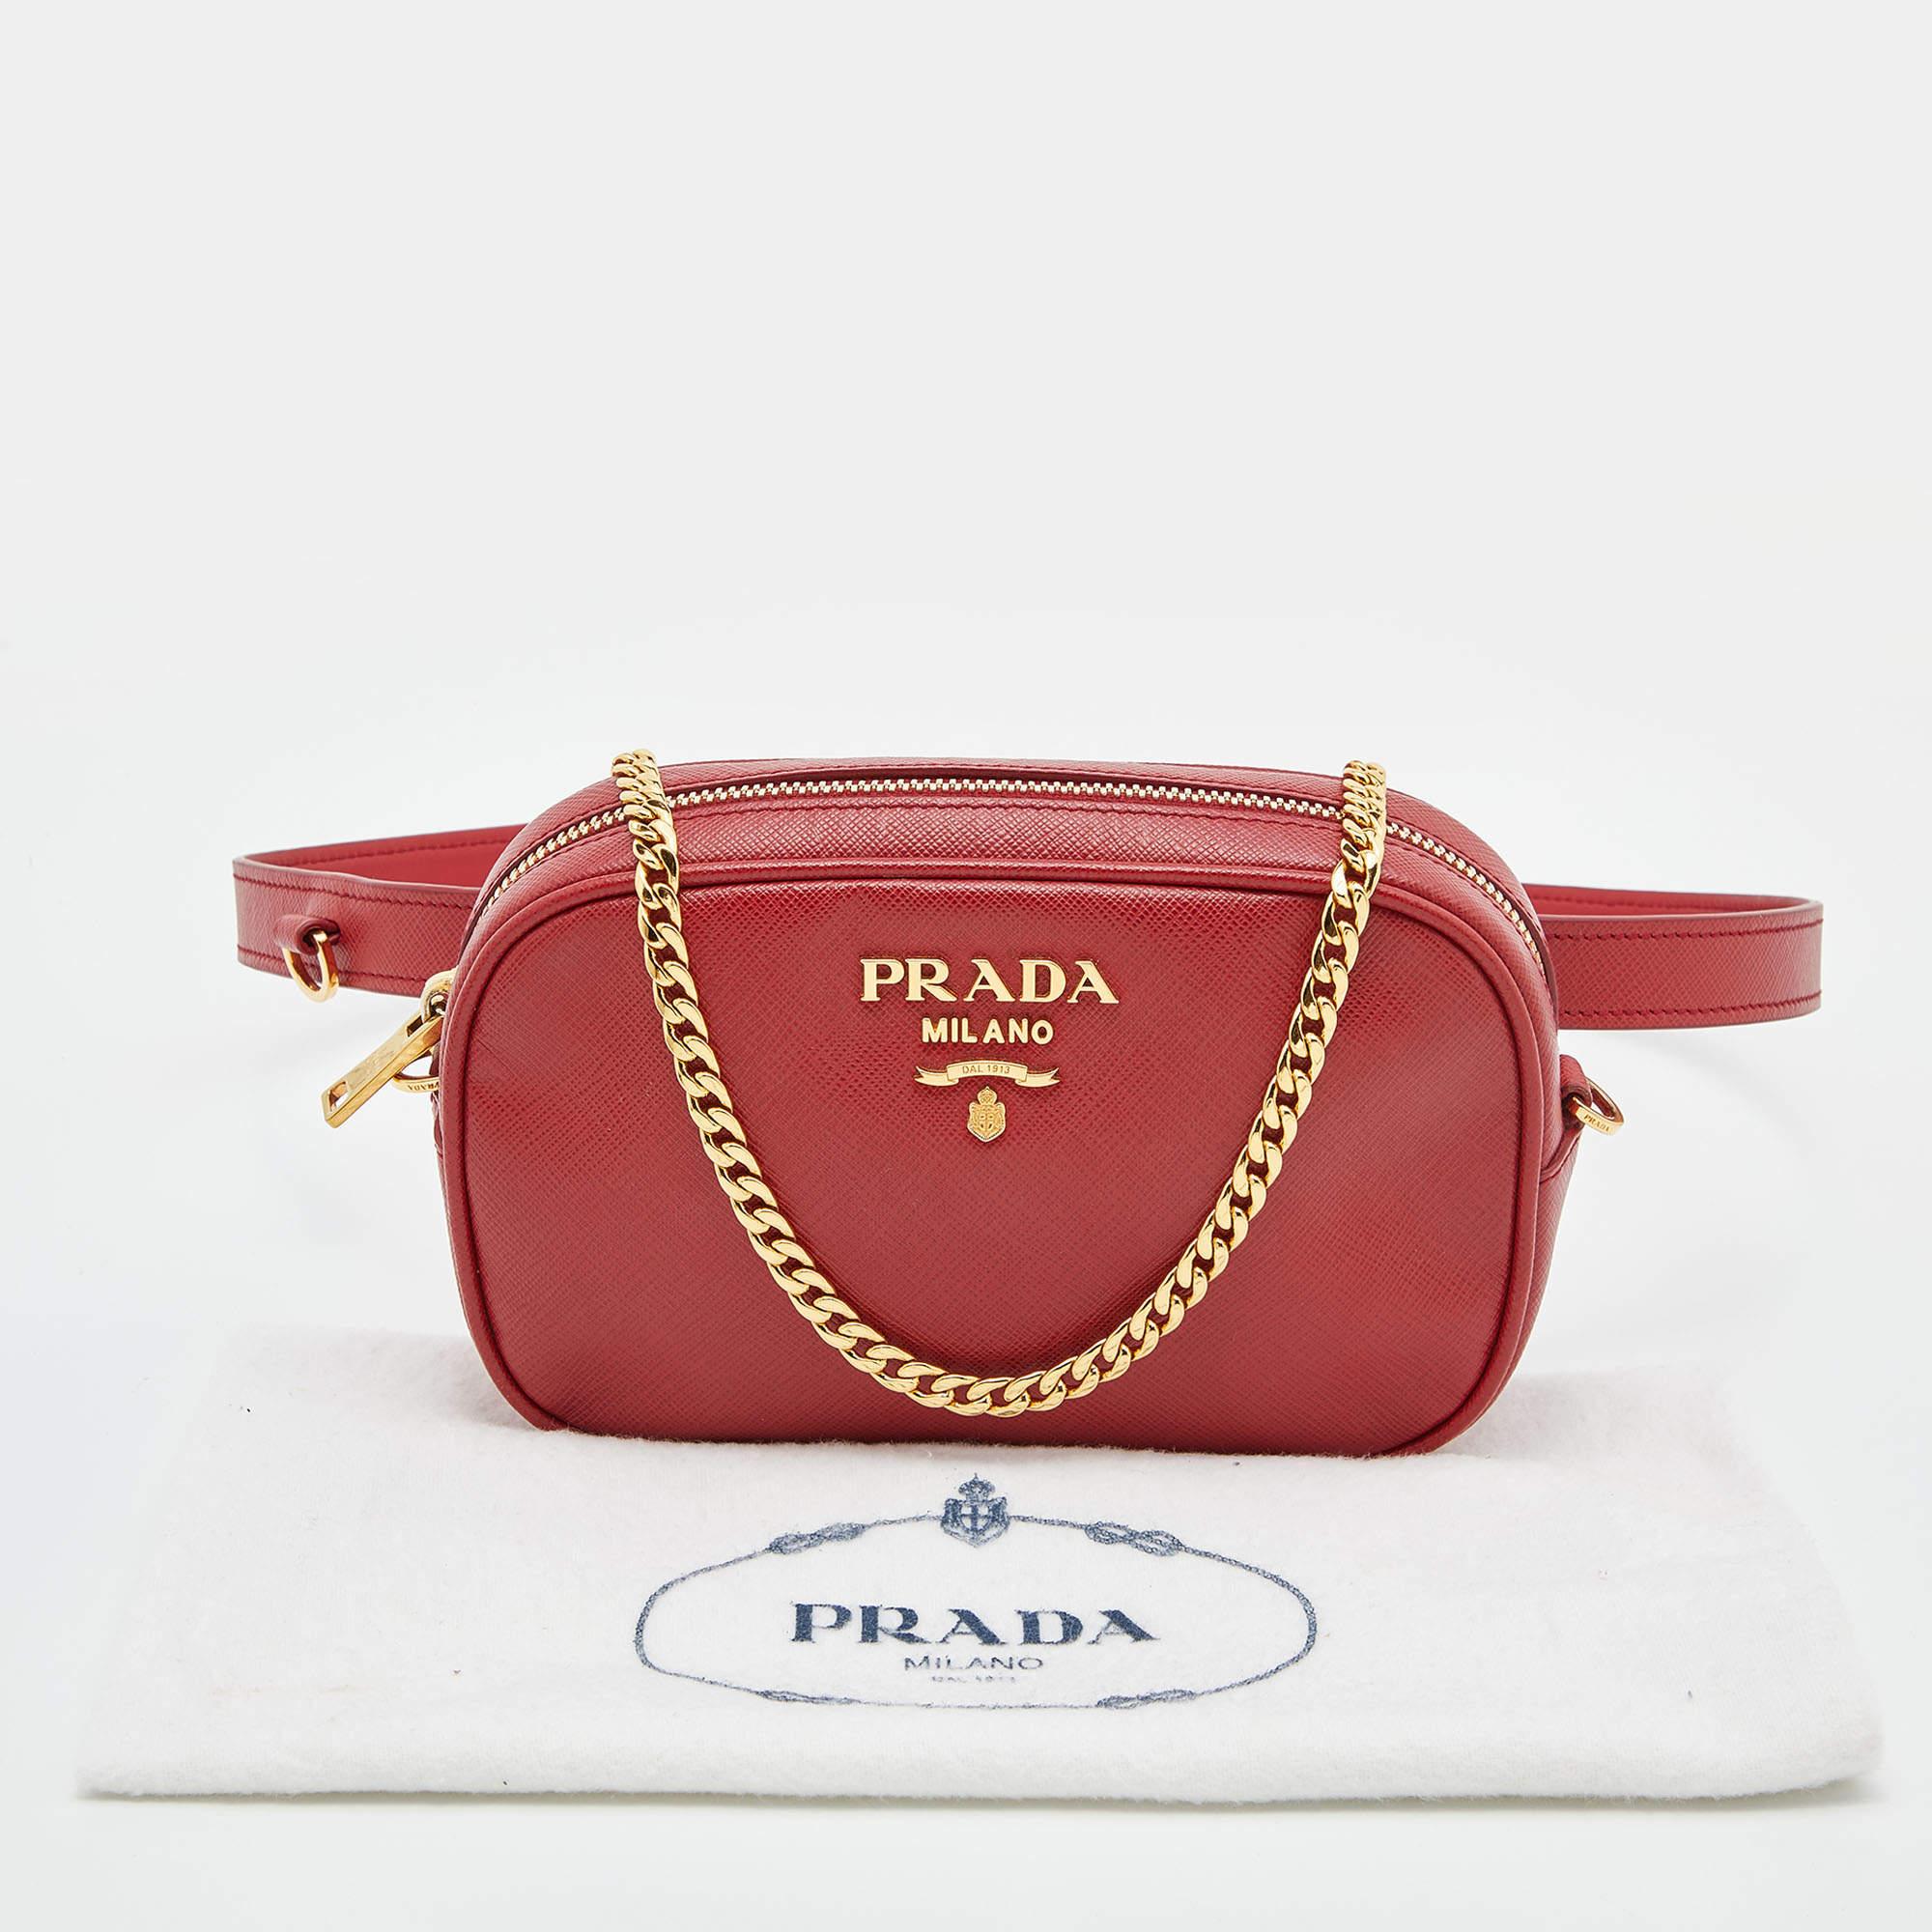 Prada Red Saffiano Lux Leather Convertible Chain Belt Bag 2